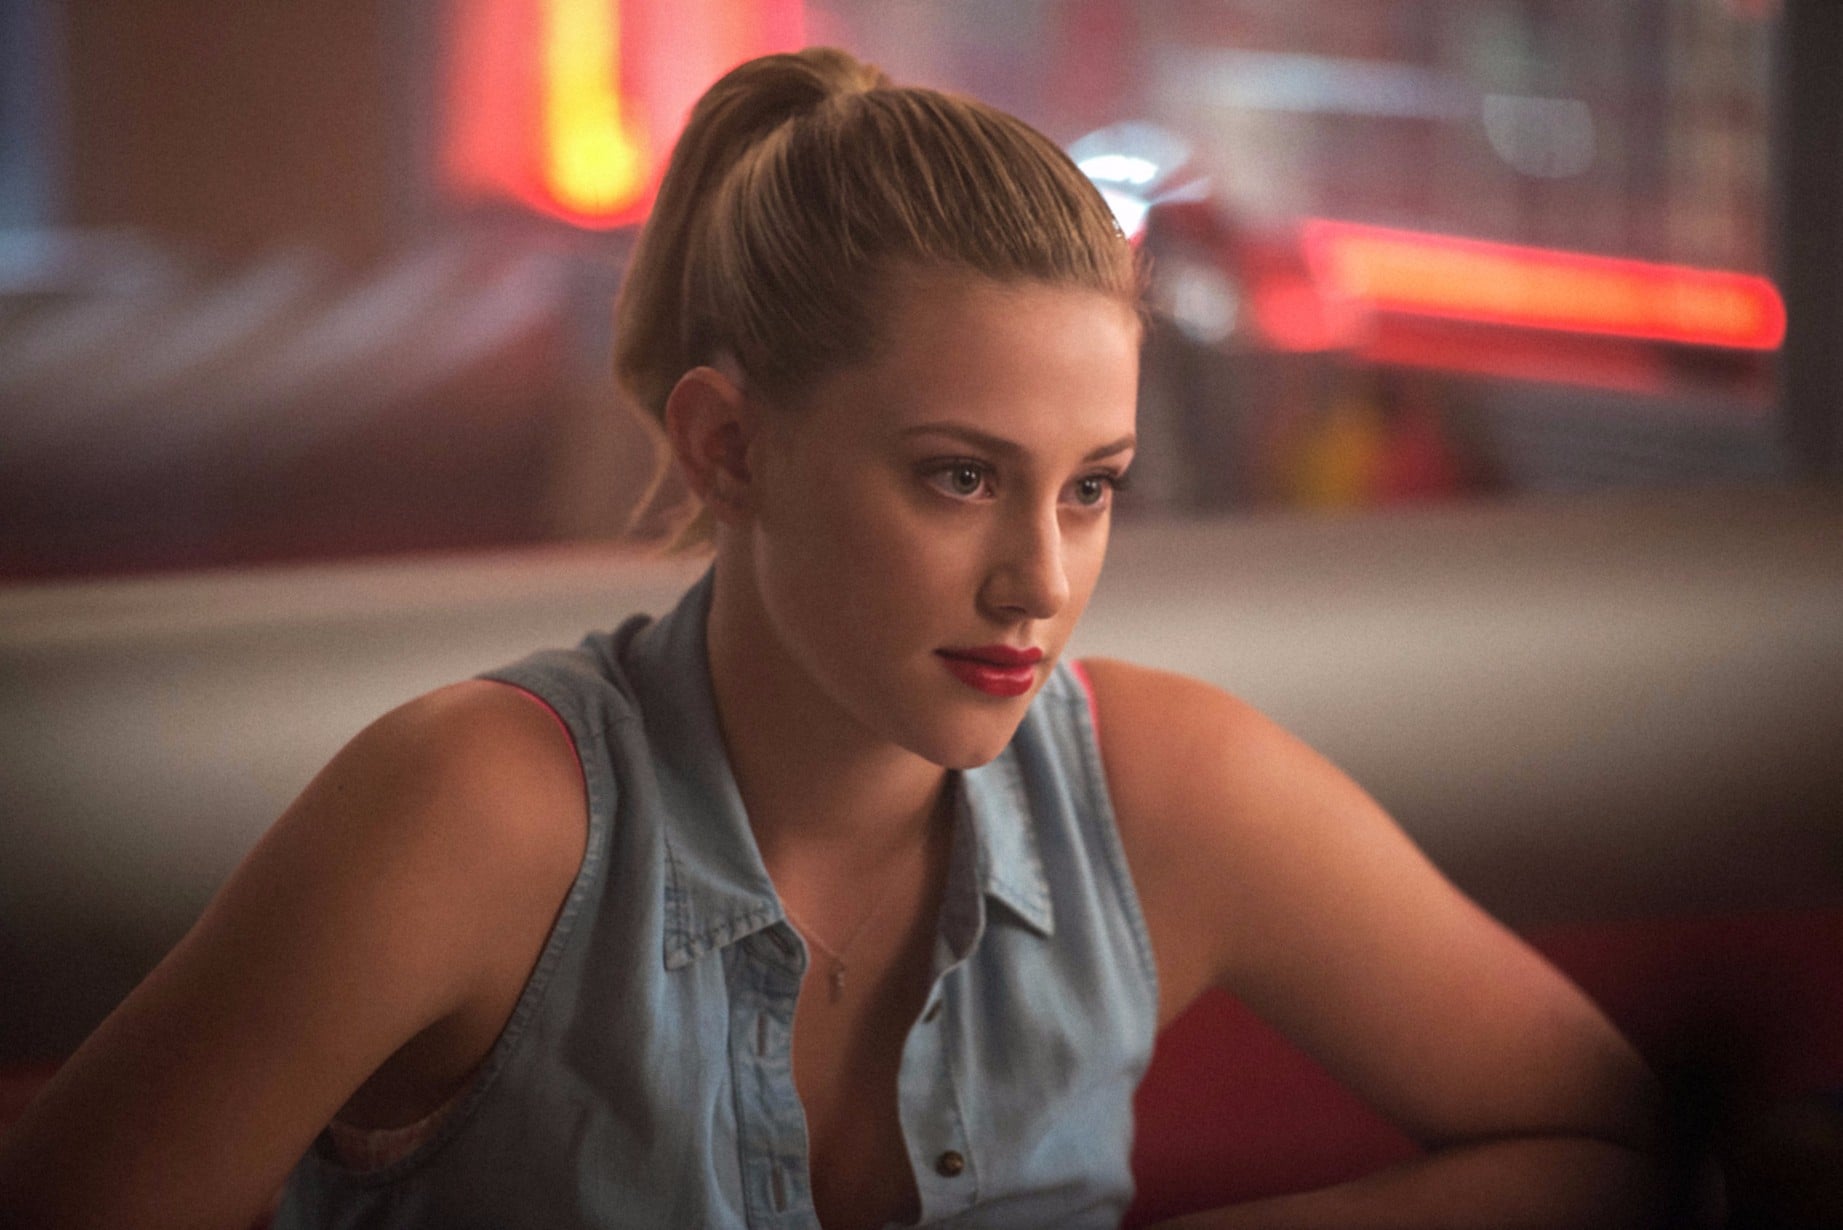 Betty Cooper  Look the Part